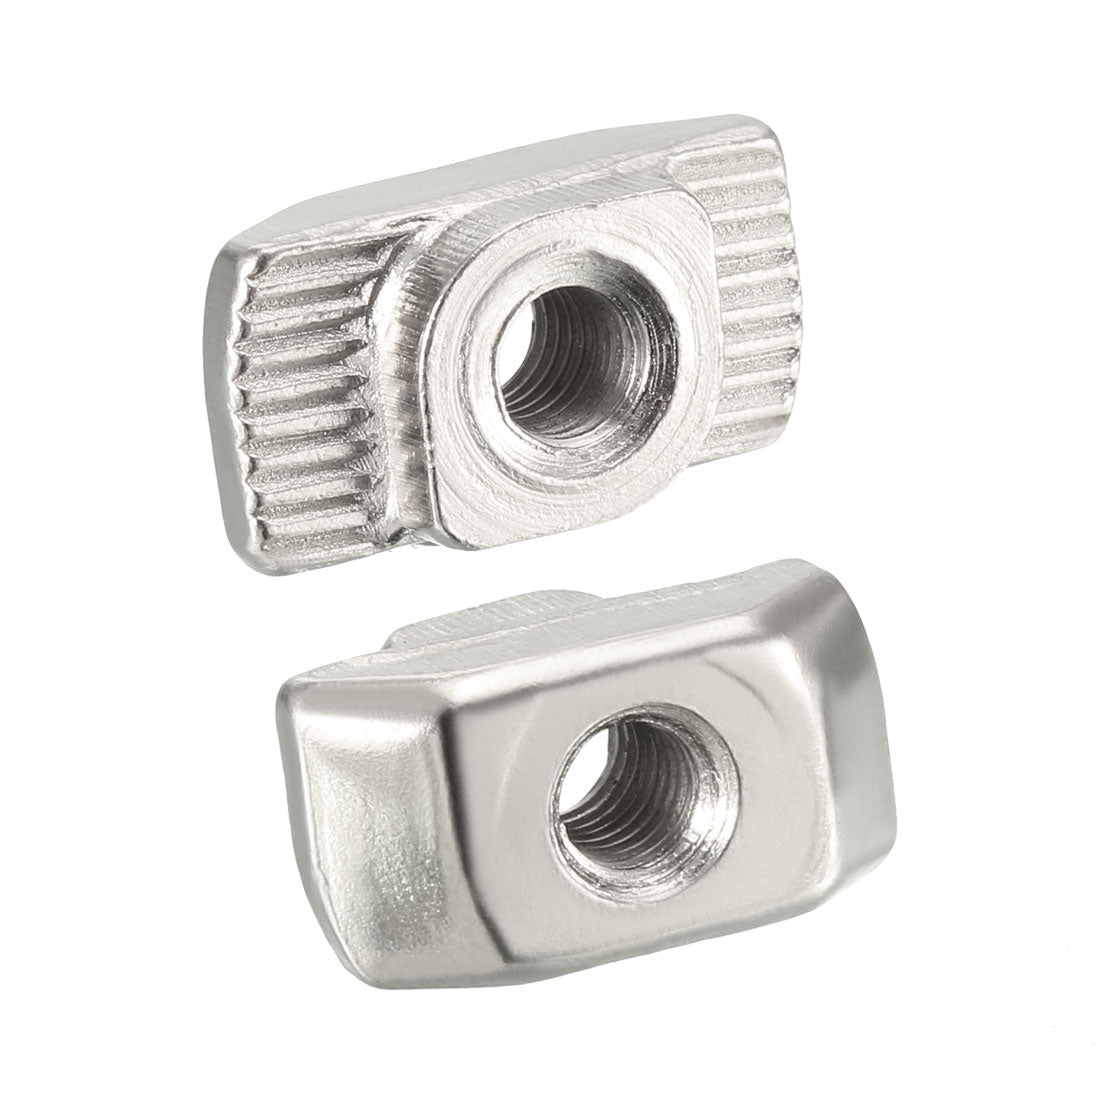 Uxcell Uxcell Sliding T Slot Nuts, M5 Thread for 4545 Series Aluminum Extrusion Profile 20pcs